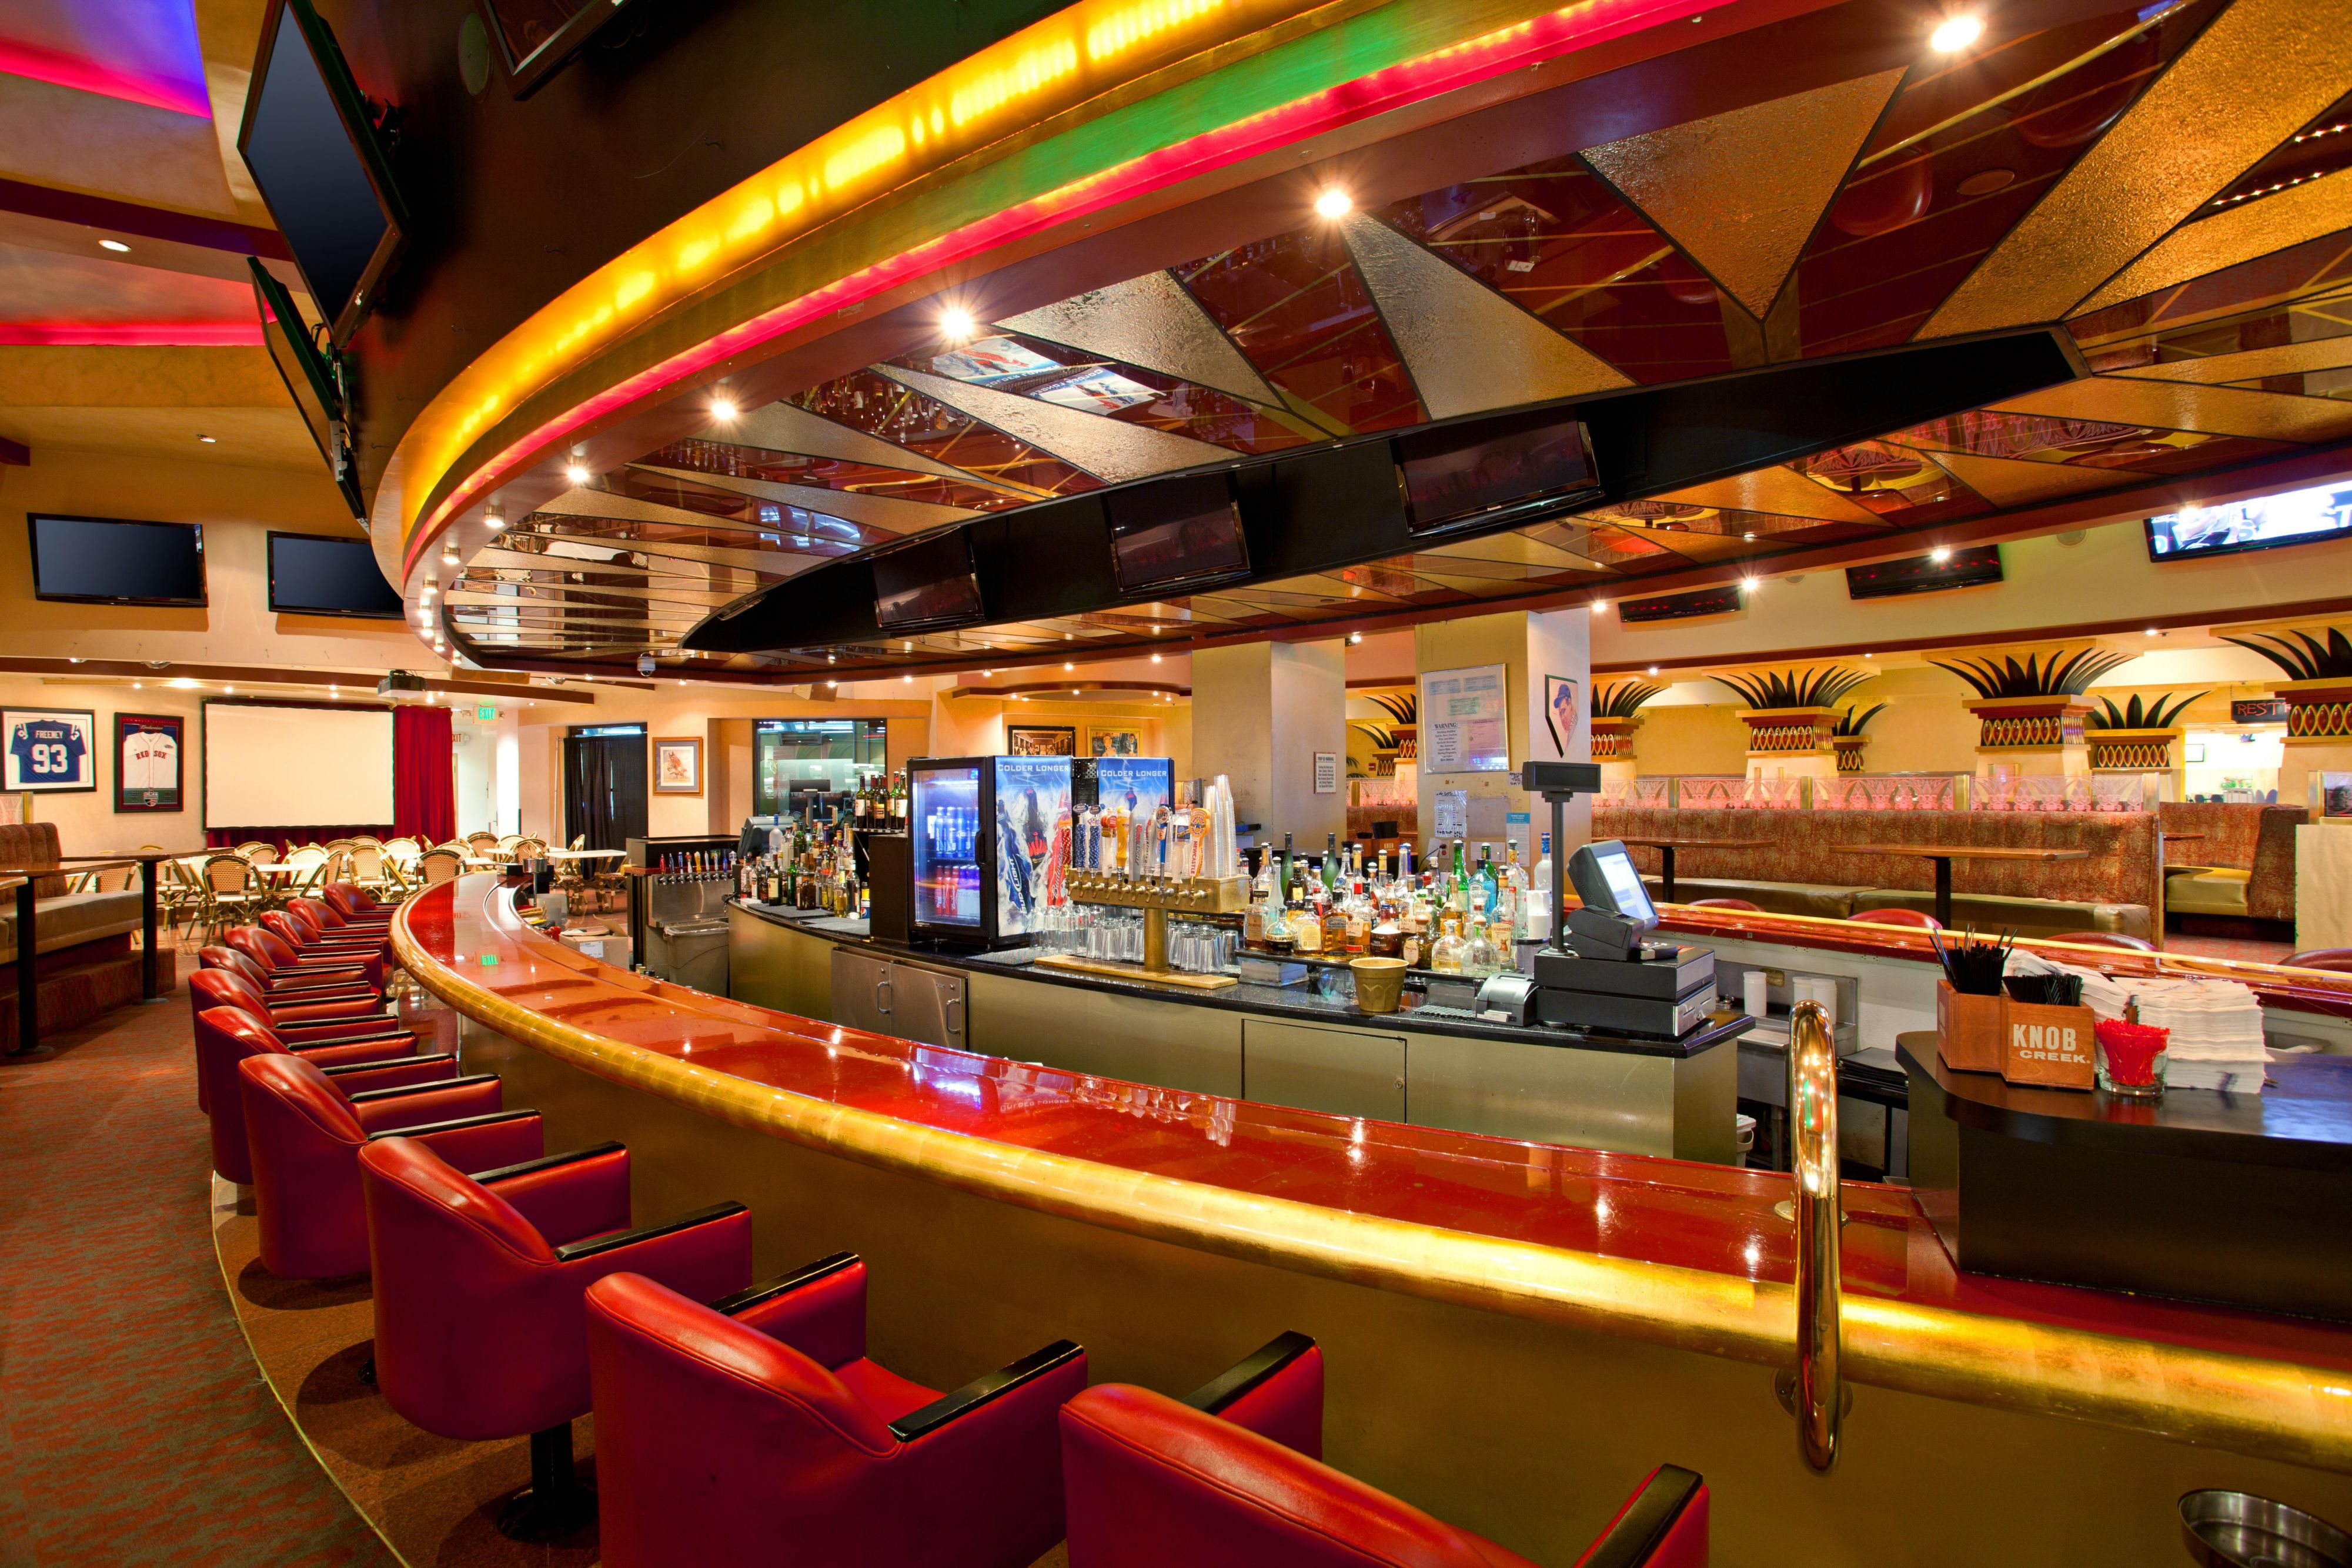 Enjoy the vibe of a sports bar at Arena Sports Bar and Grill